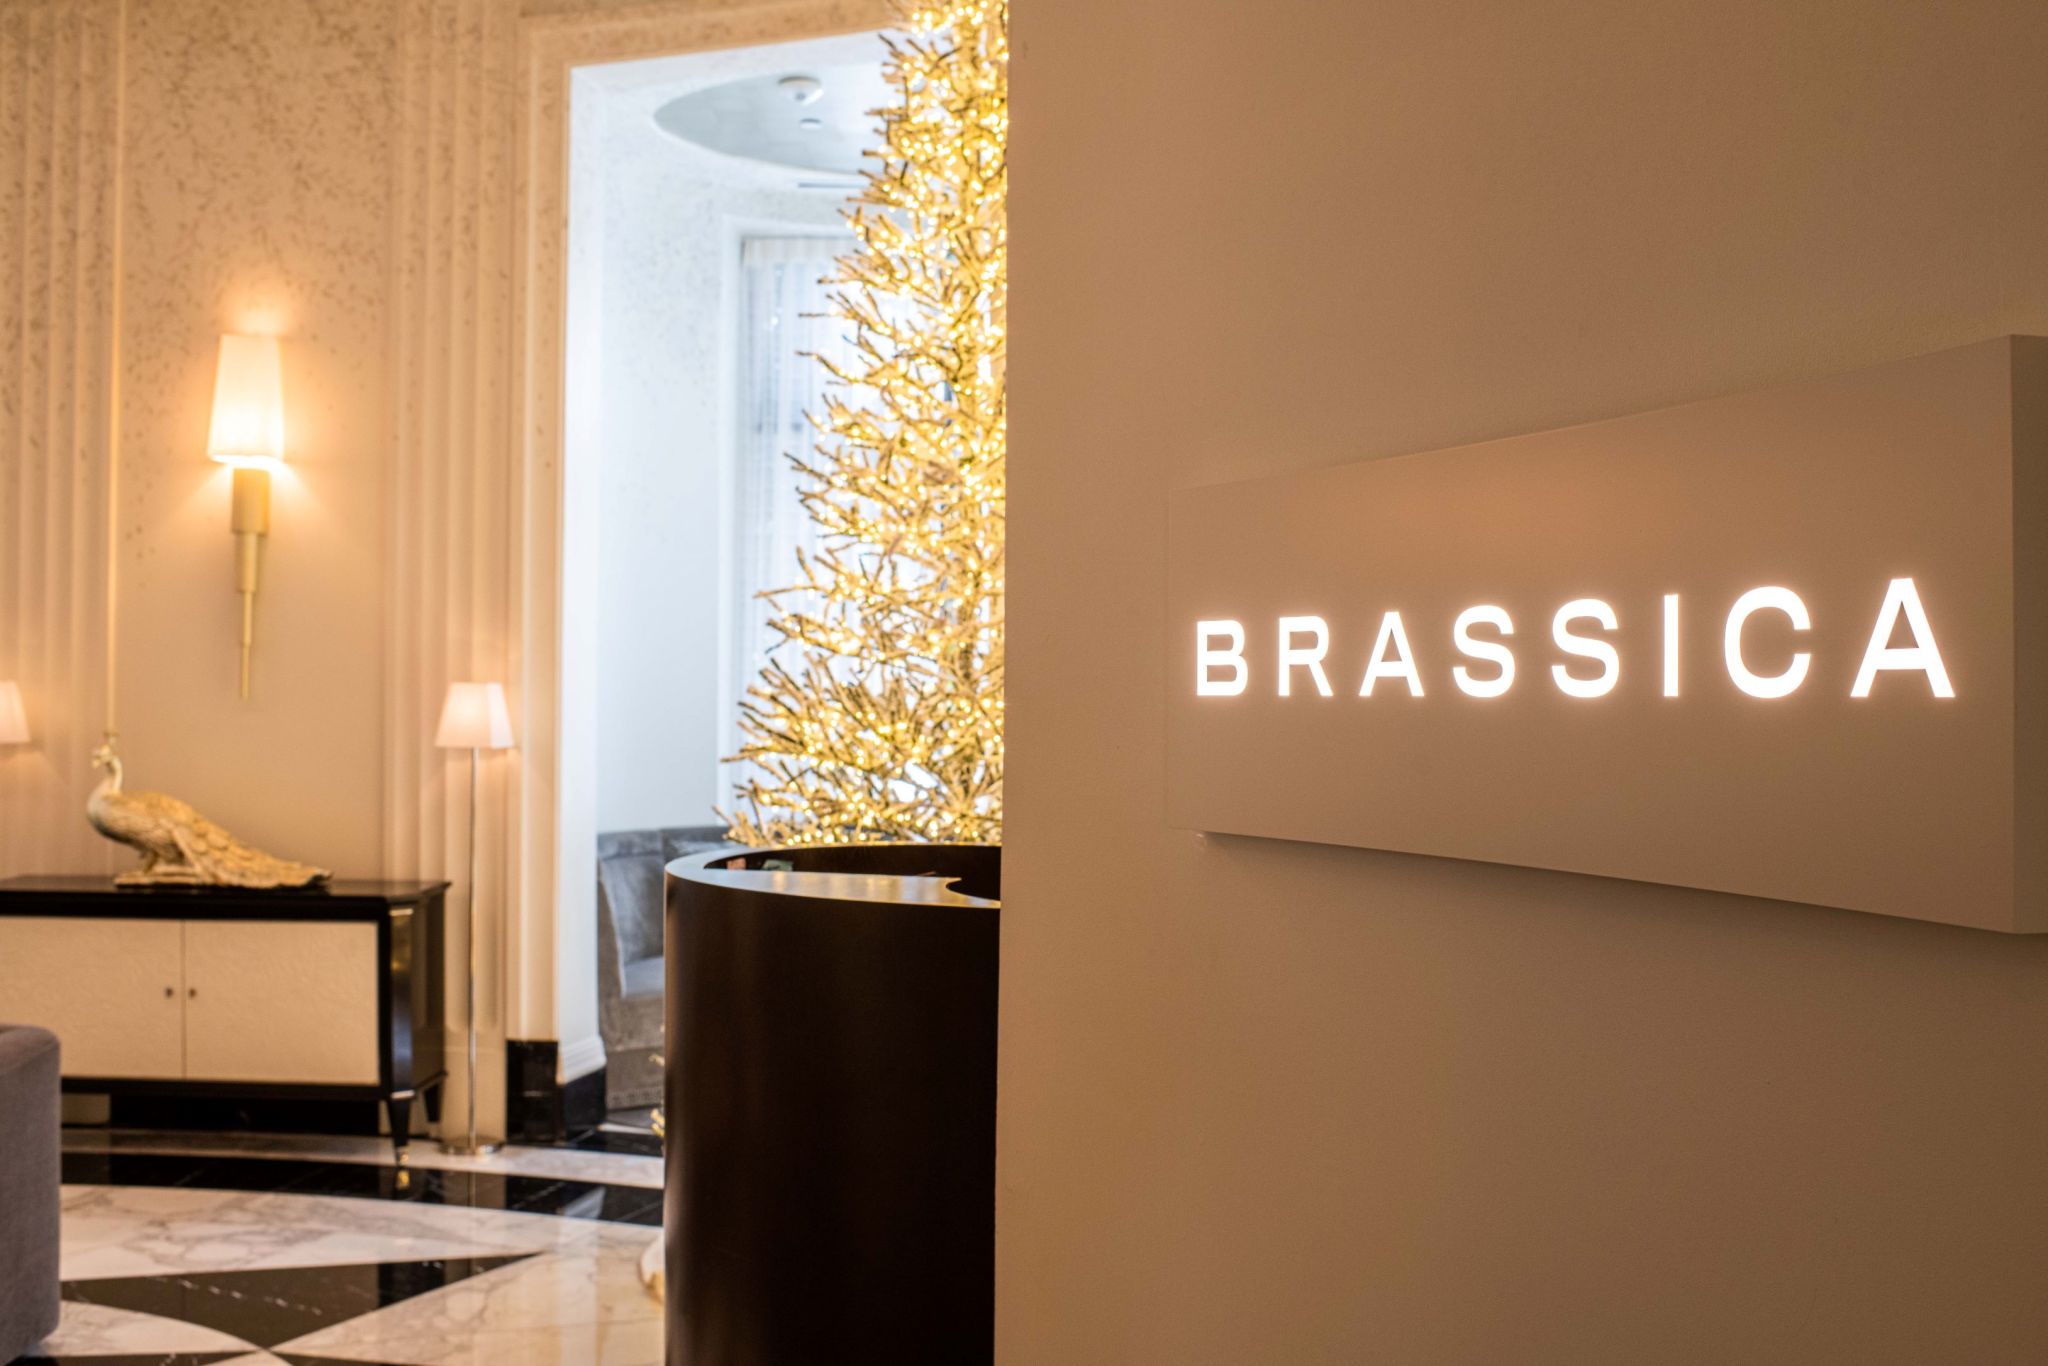 French cuisine with local ingredients is what you'll find at Brassica